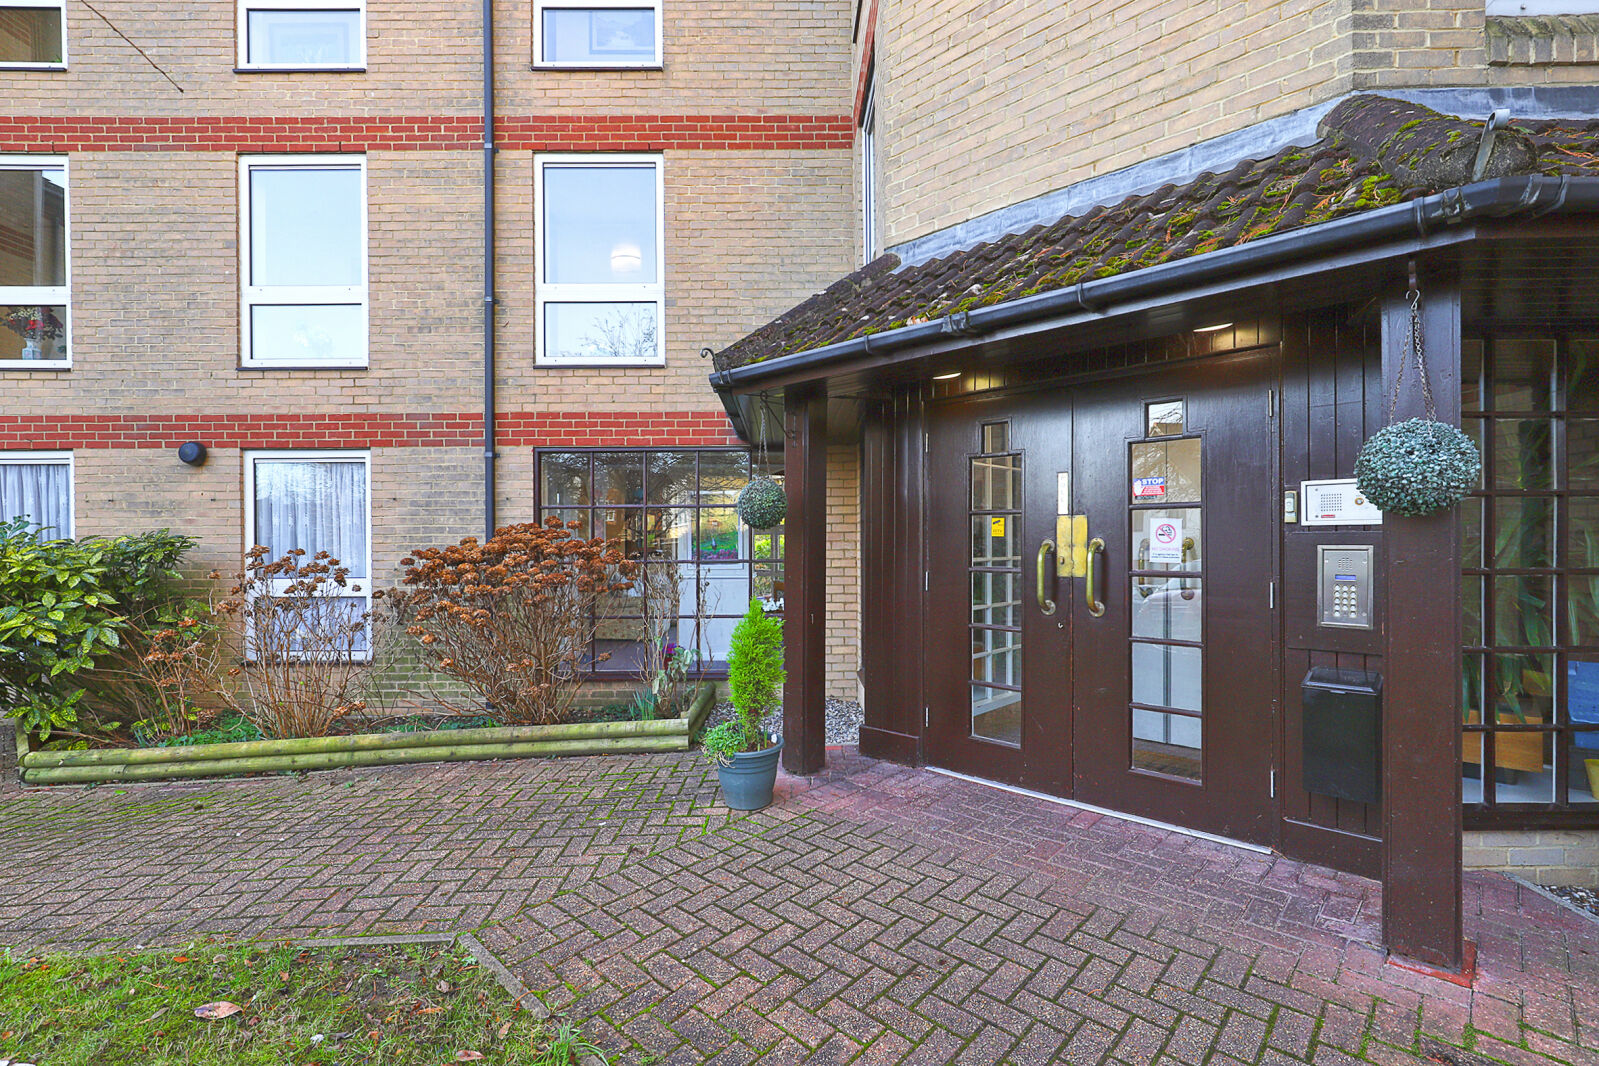 1 bedroom  flat for sale High Road, Loughton, IG10, main image